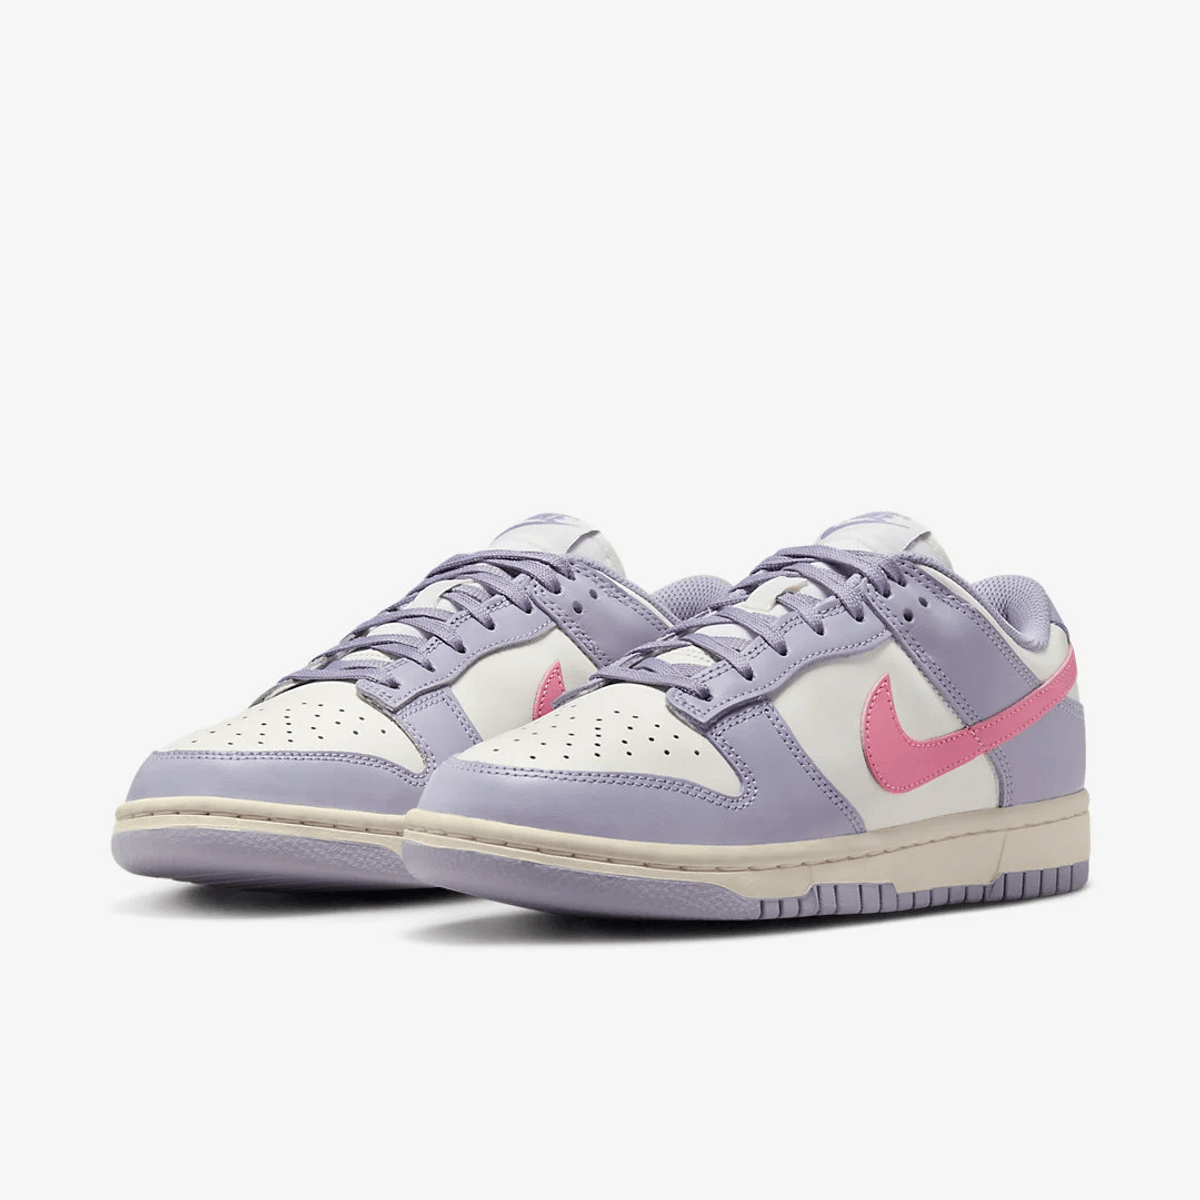 The latest Nike Dunk Low Will Release In An Indigo Haze Colorway